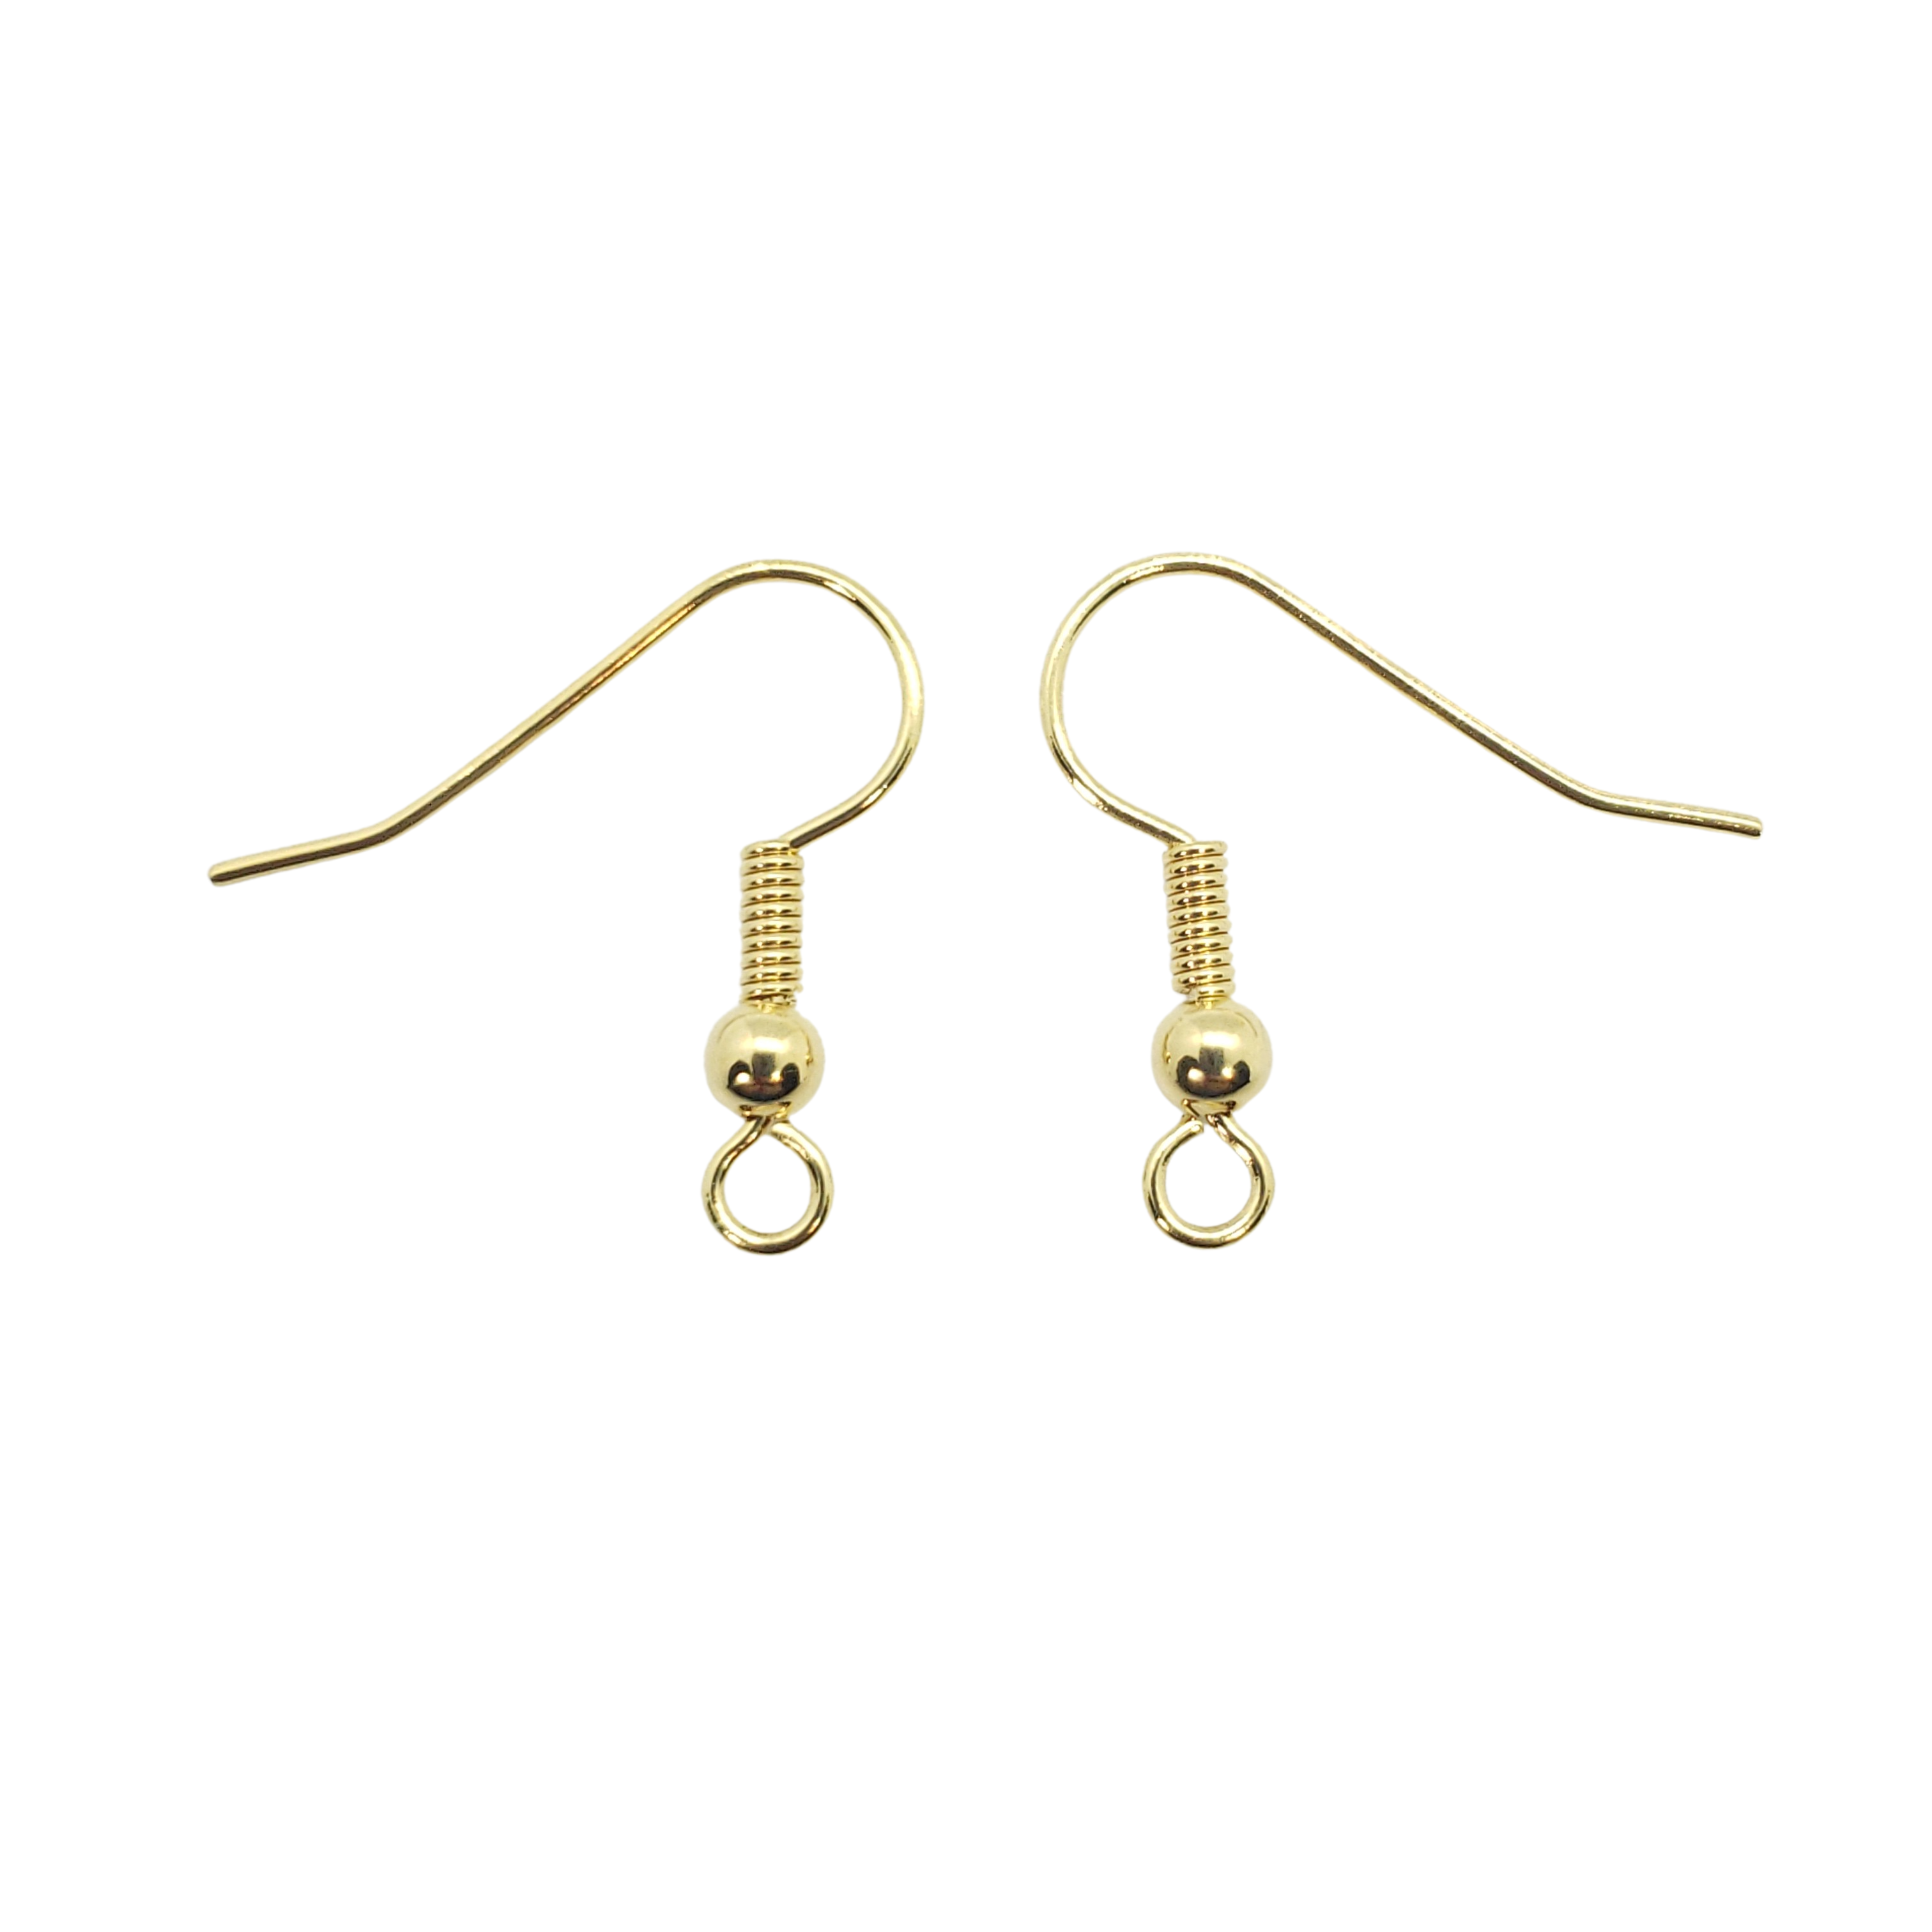 19mm gold plated metal fish hook ear wires, 48 ct. (24 pair) – My